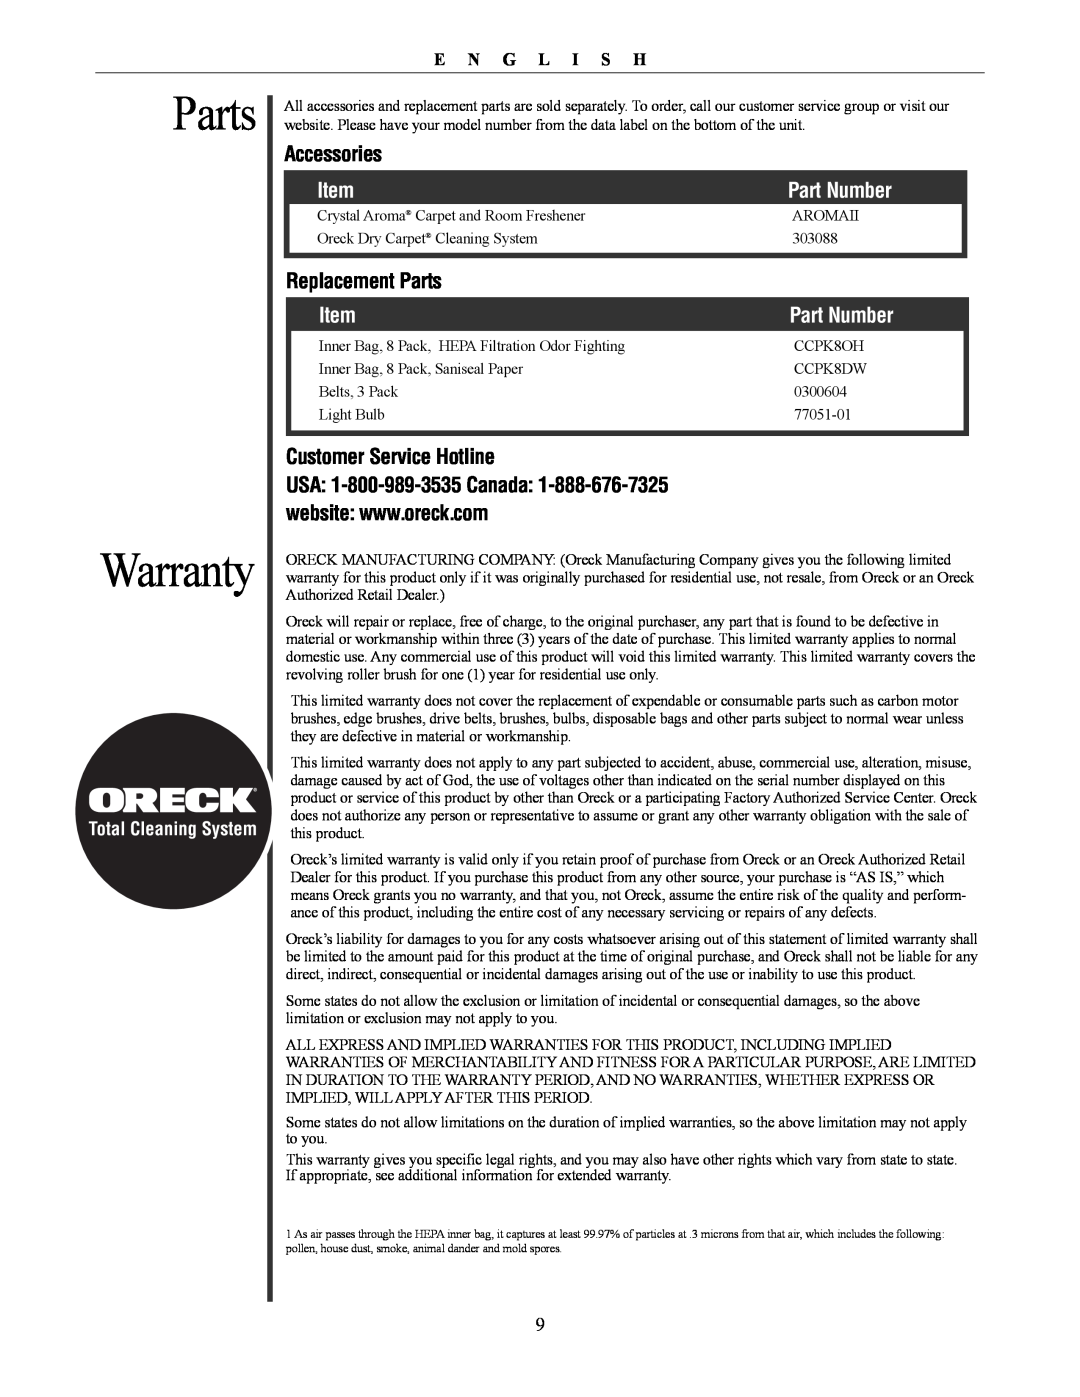 Oreck David manual Parts Warranty, Part Number, E N G L I S H, Total Cleaning System 